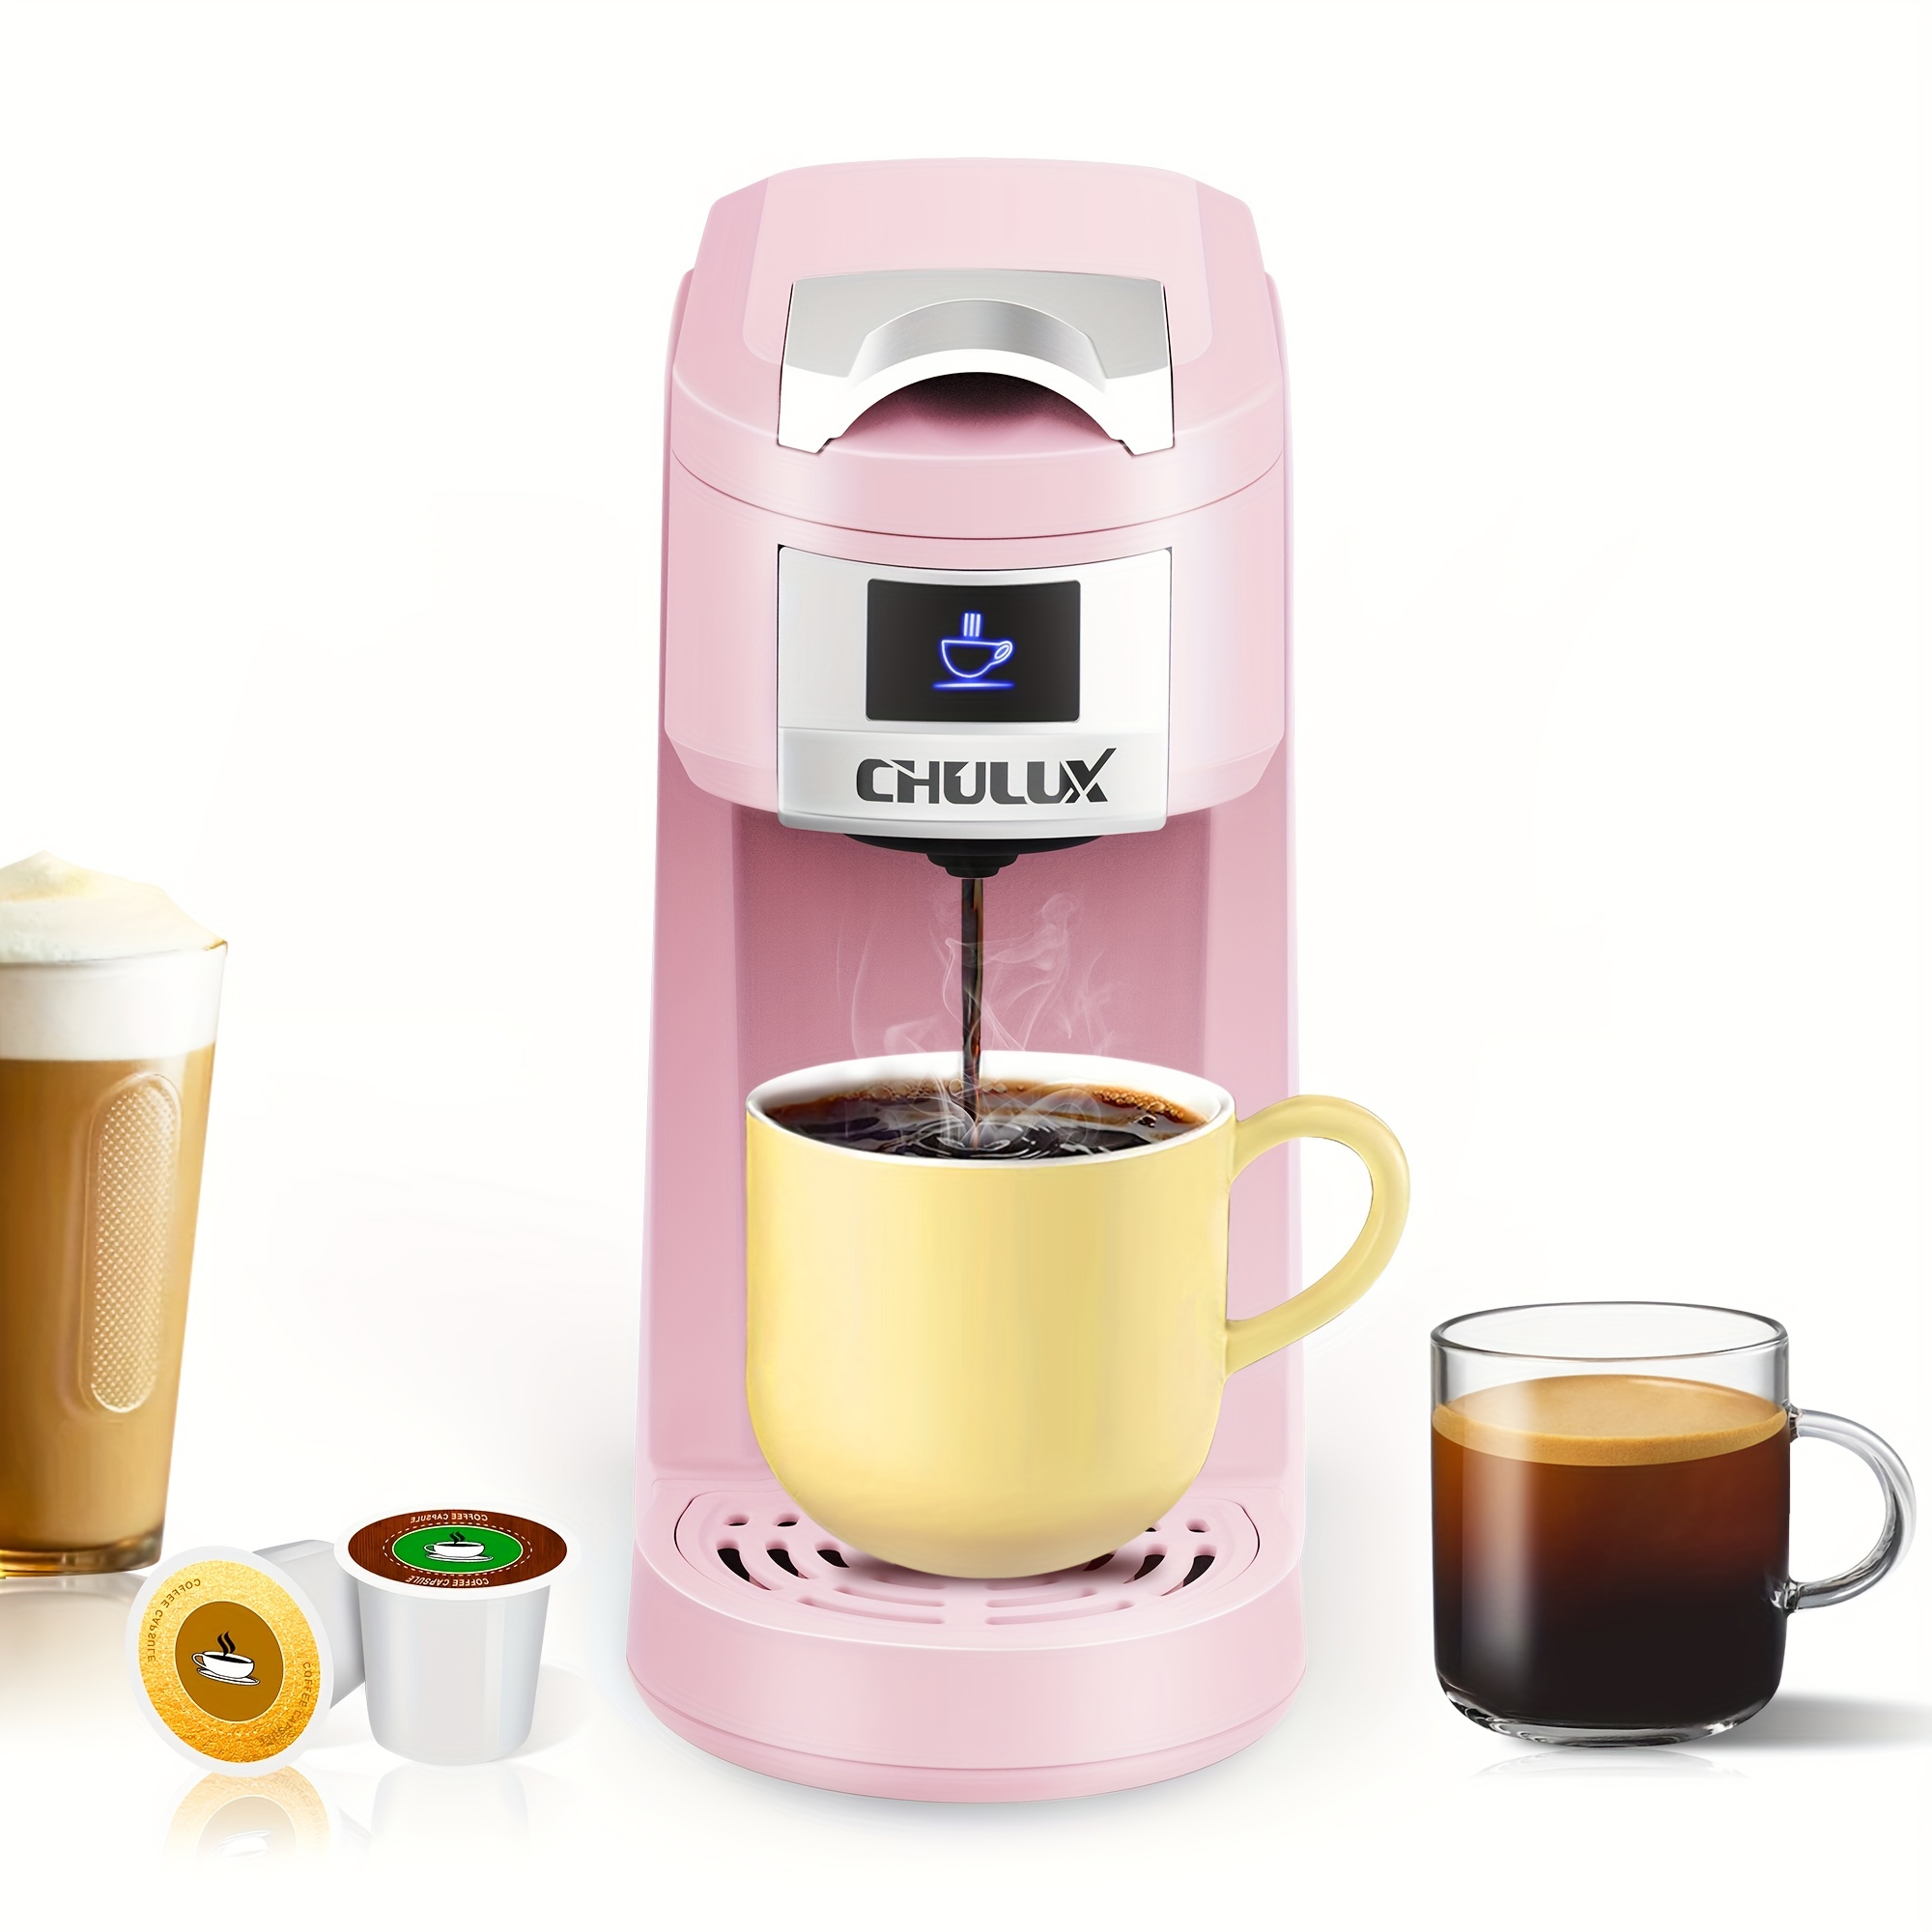 1pc,Single Serve Coffee Maker - 3-in-1 Machine for K-Cups, Pods, and Ground  Coffee - Fast Brewing in Minutes - Auto Shut Off - Includes Coffee Tool,  Pink